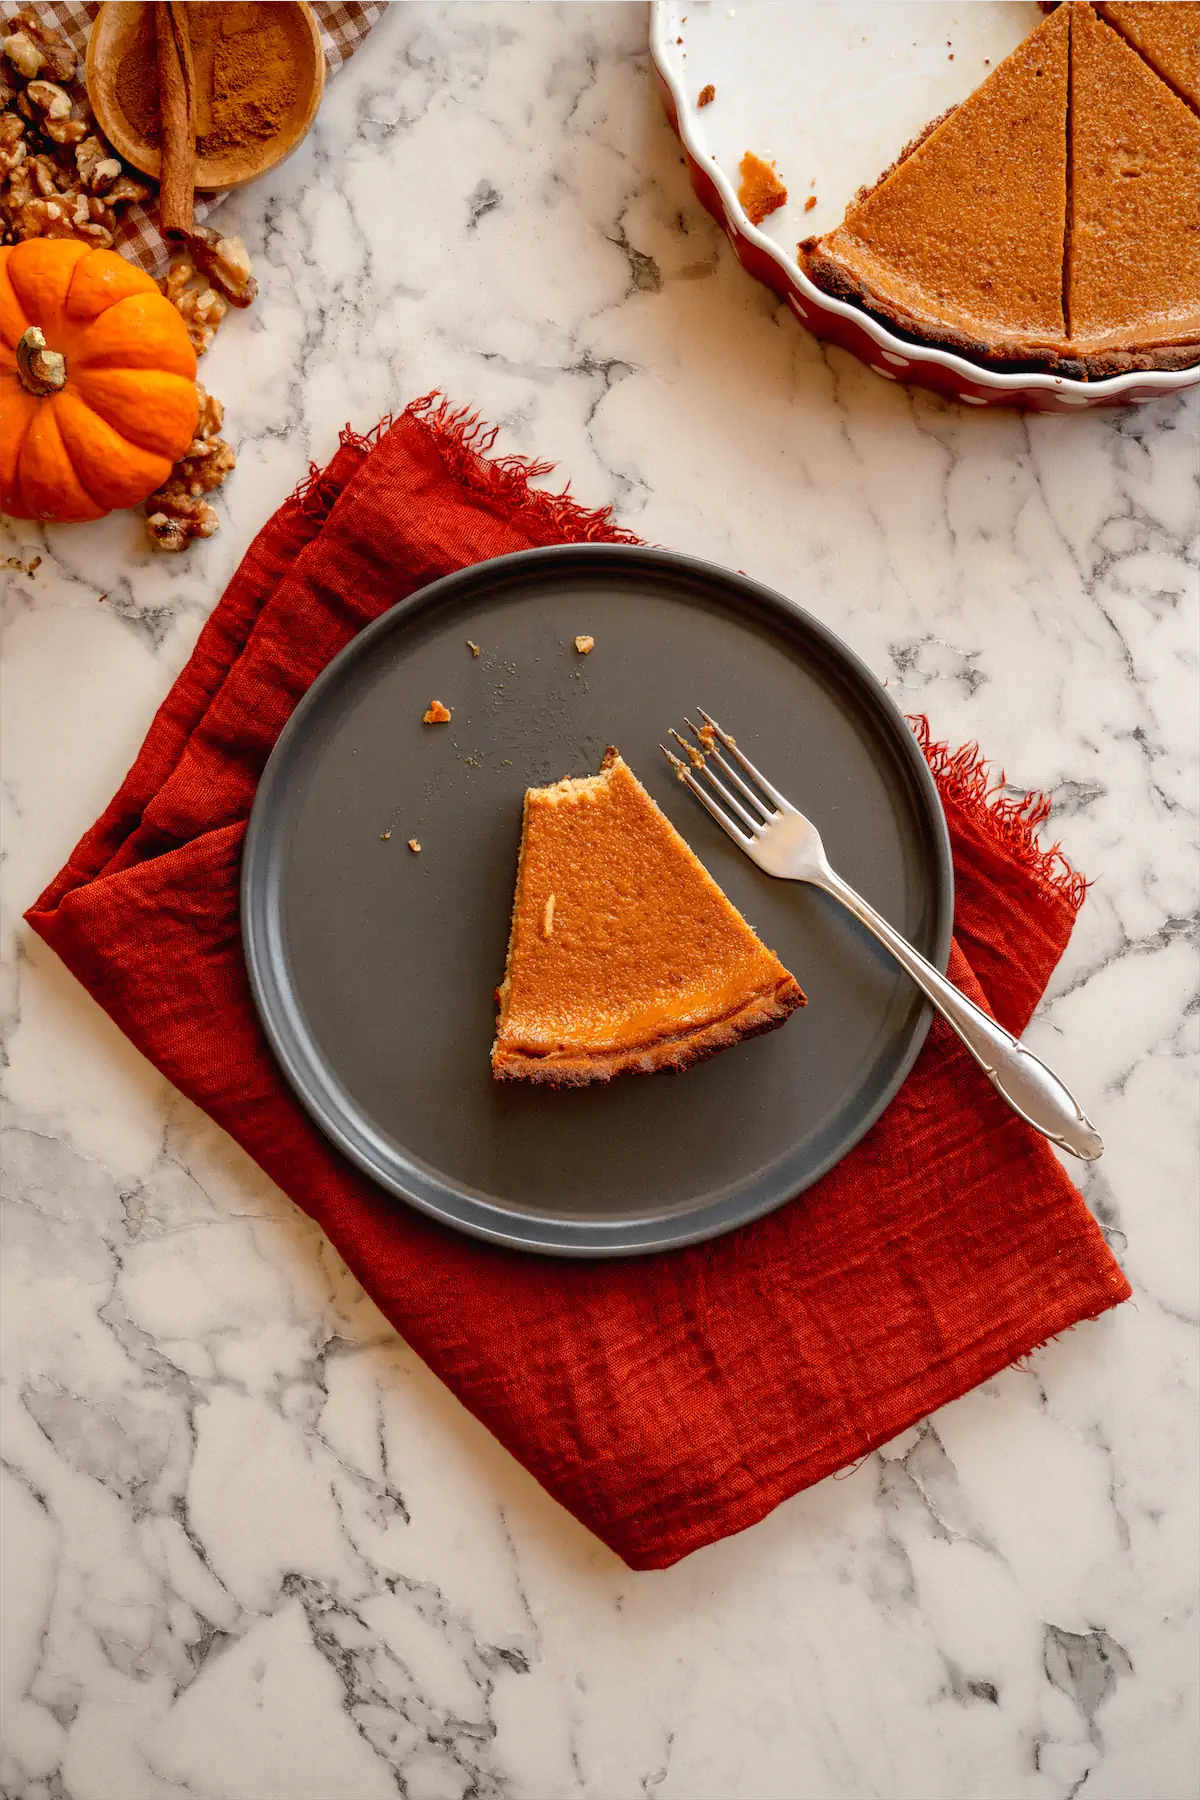 A slice of keto pumpkin pie on a plate, with a missing morsel from the pie